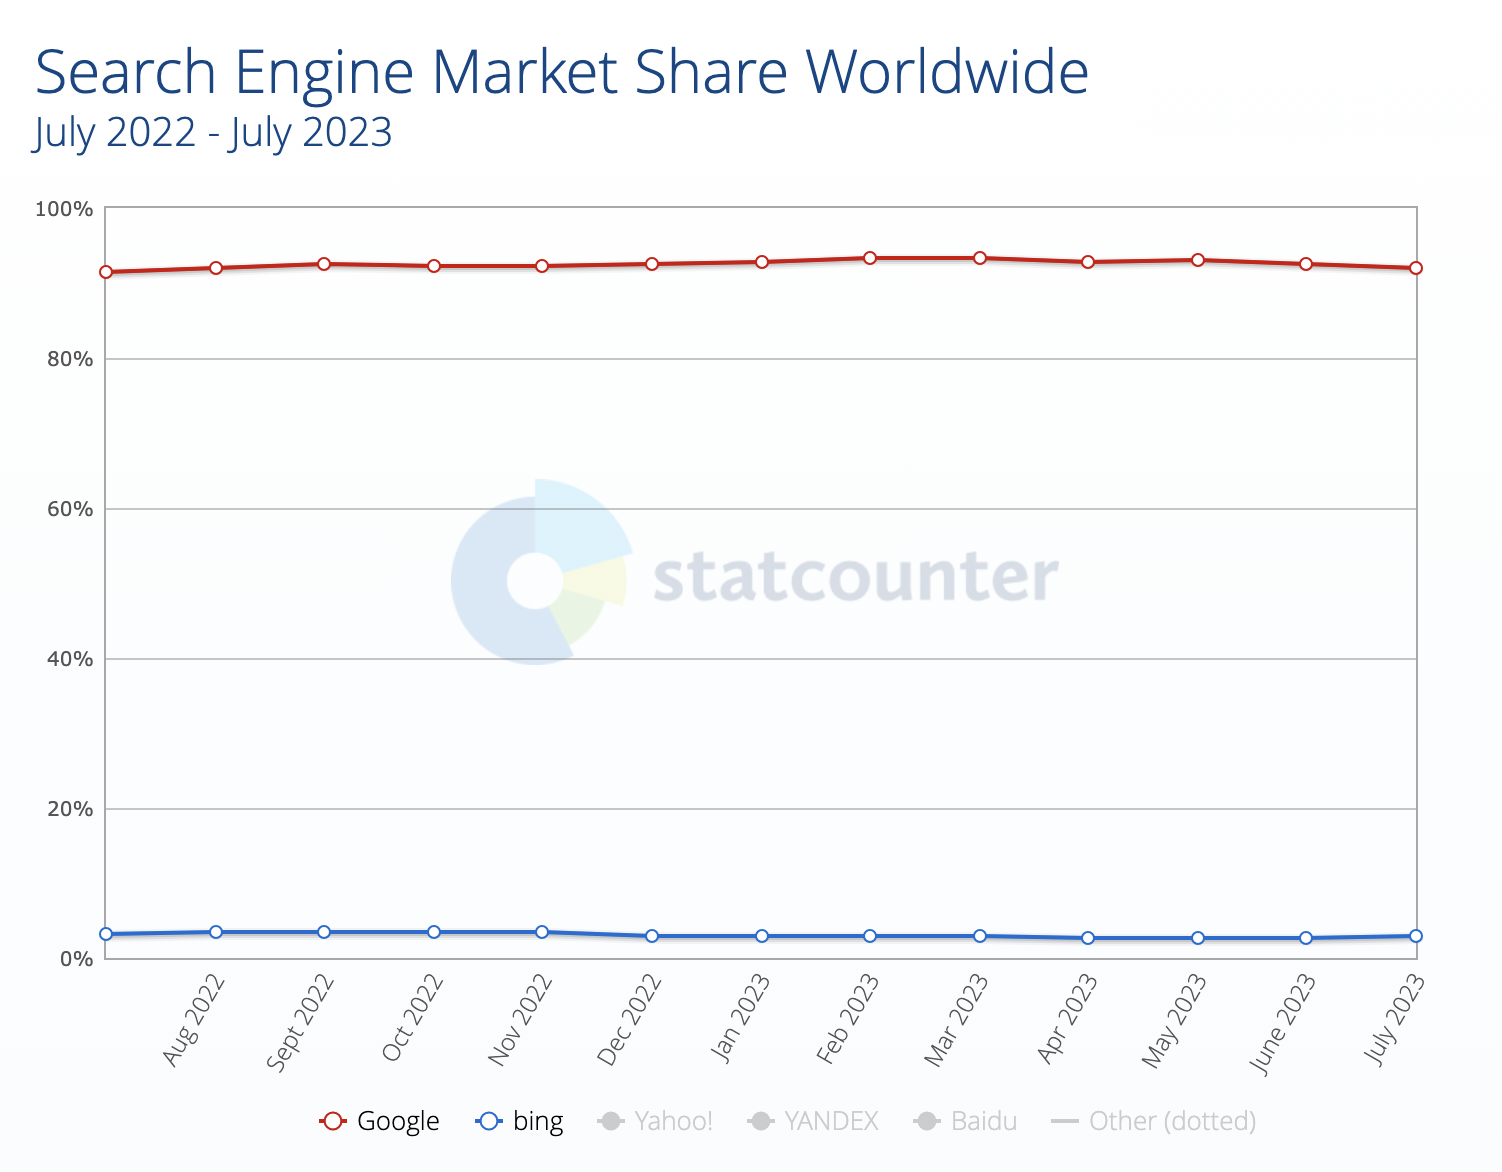 a graph s،wing "search engine market share worldwide" for July 2022-July 2023 period